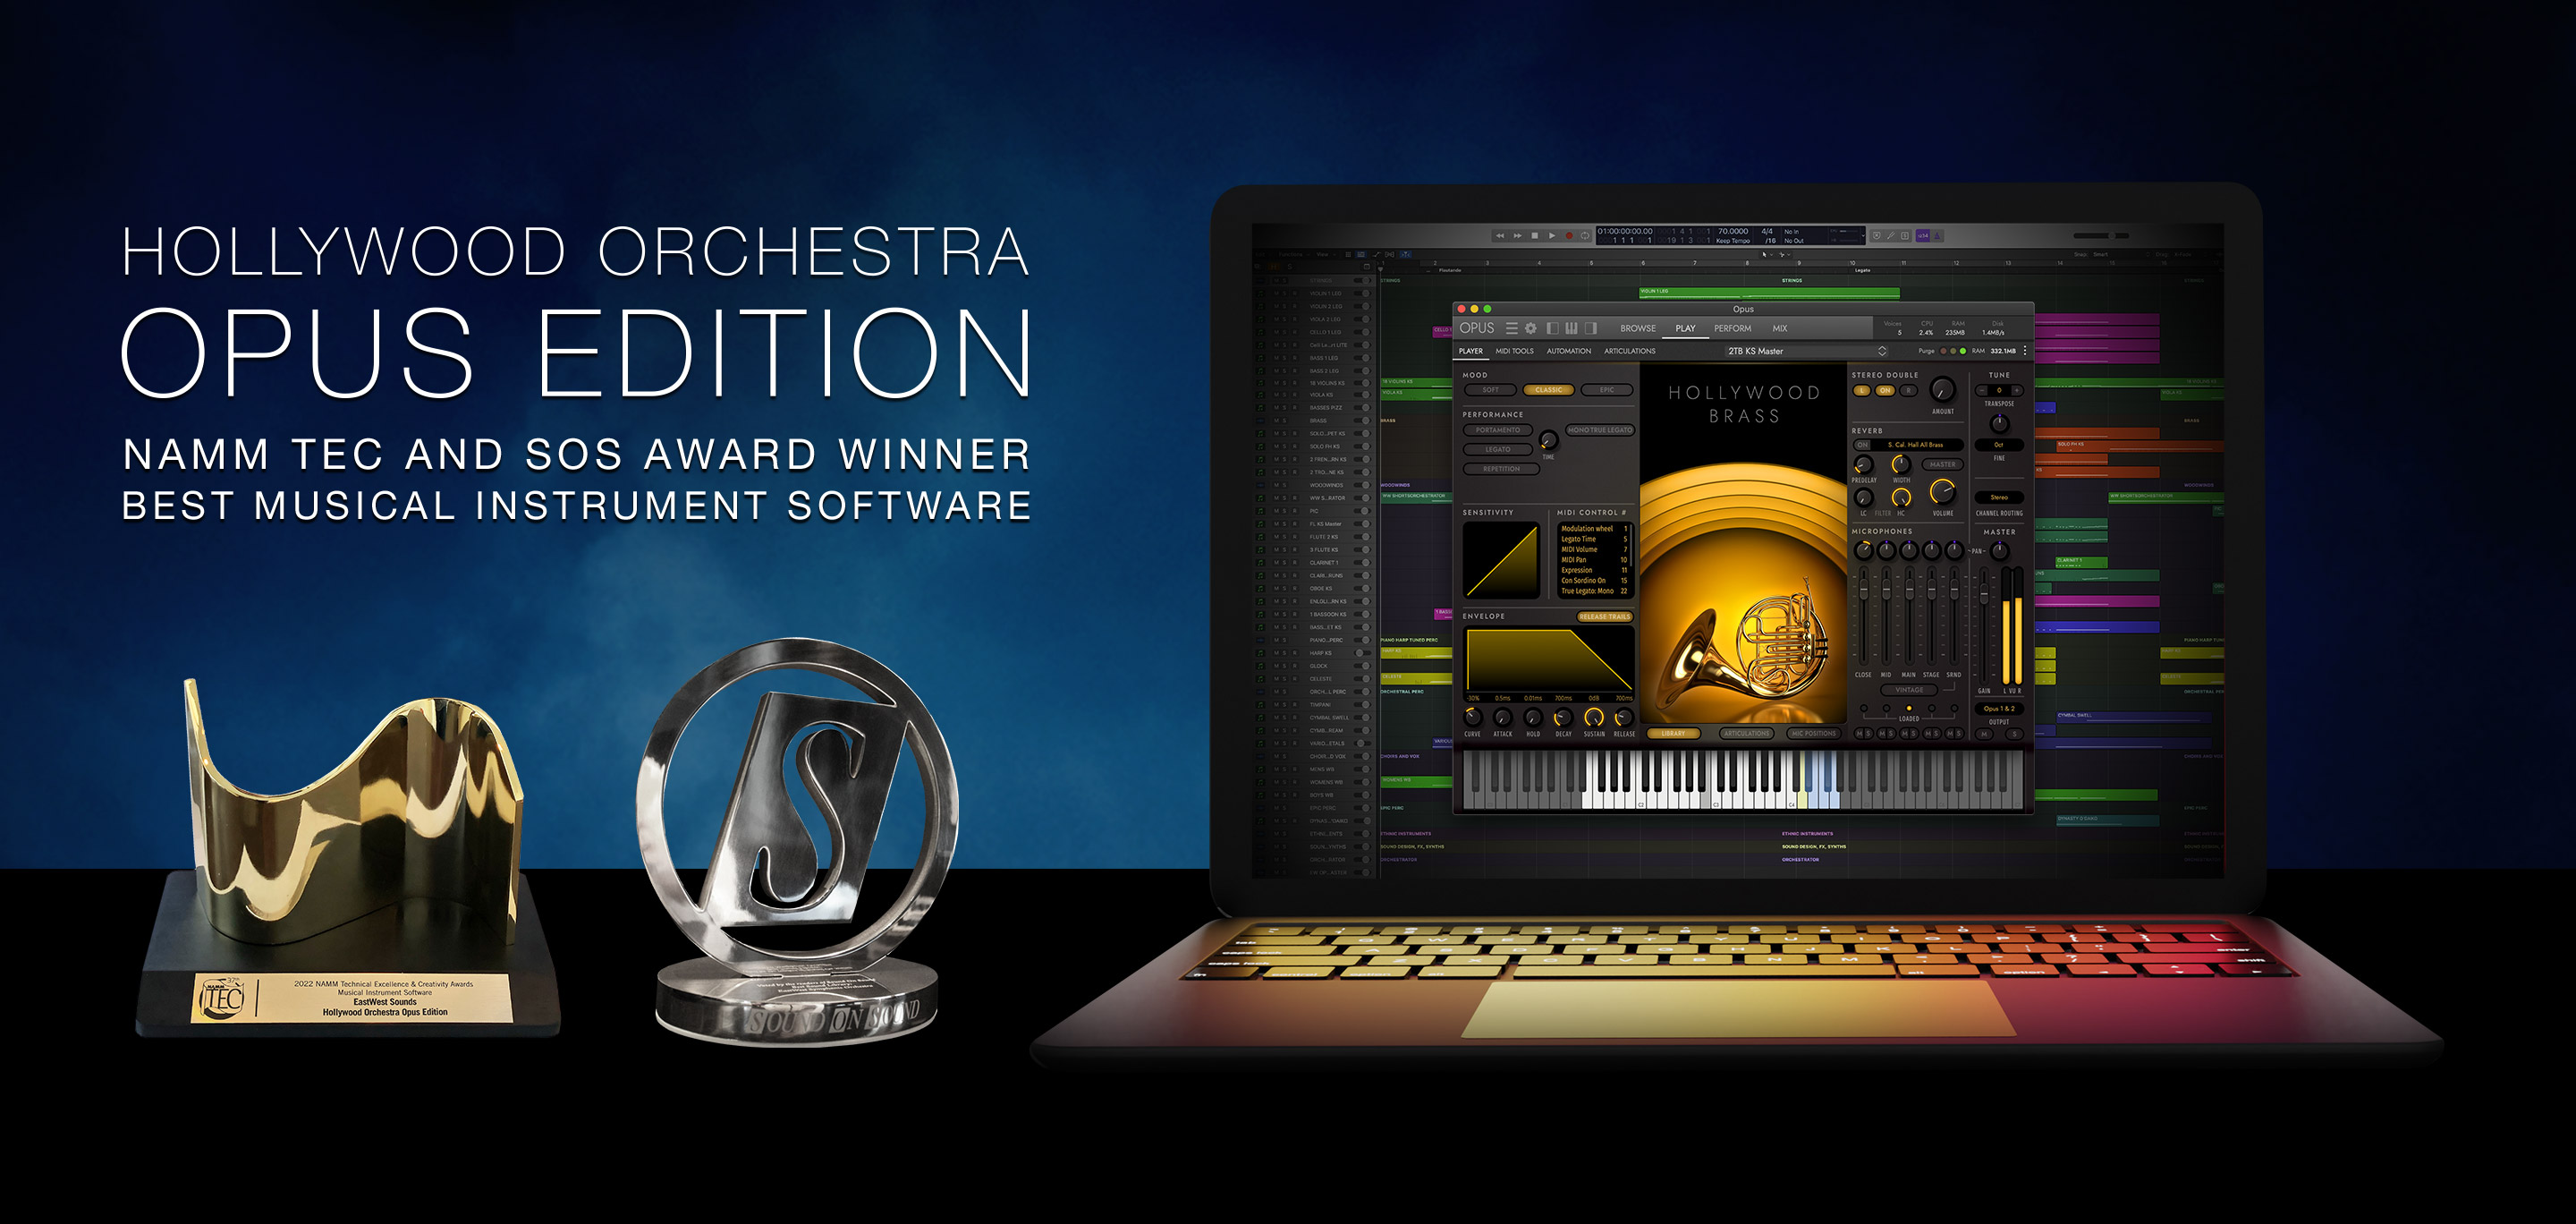 EastWest Hollywood Orchestra Opus Edition - NAMM TEC and SOS Award Winner